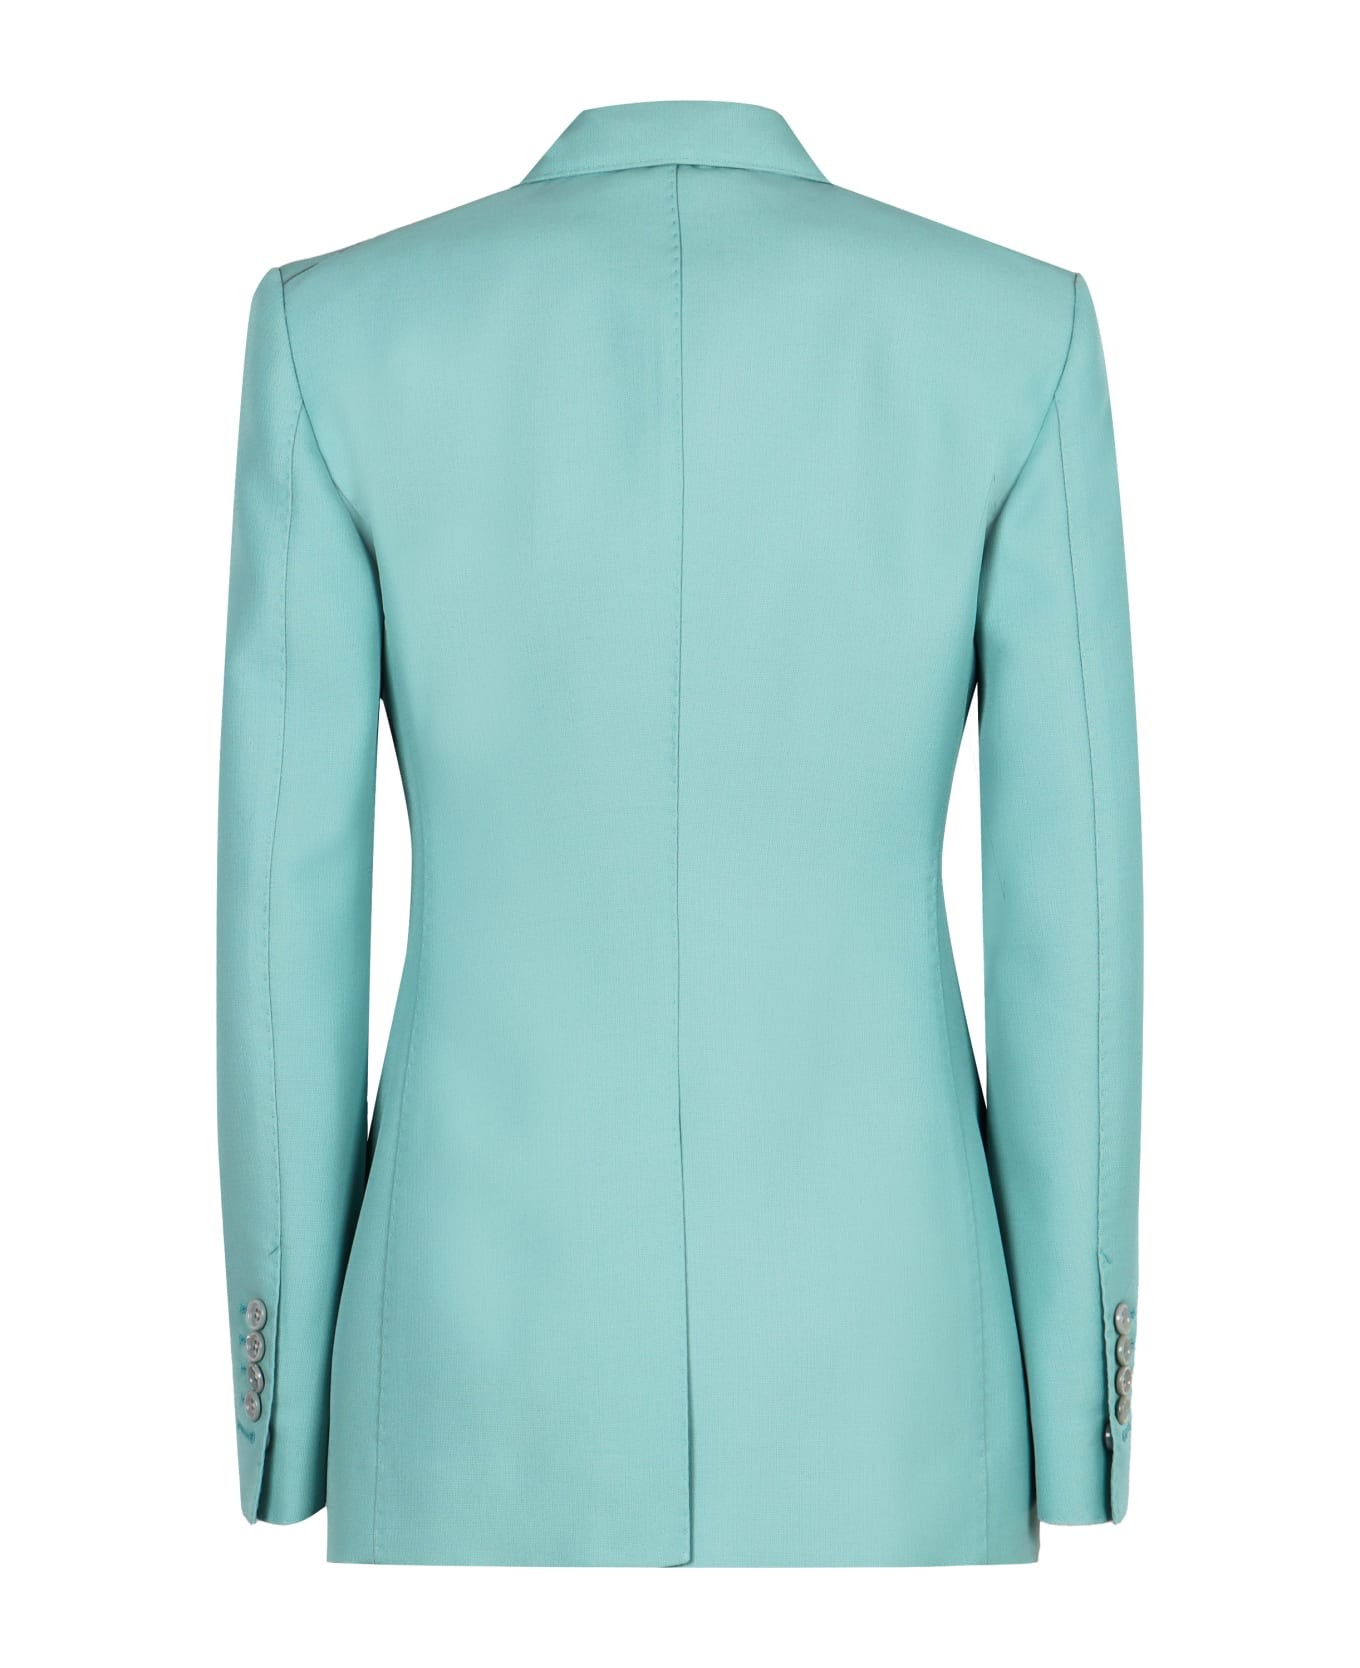 Tom Ford Double-breasted Wool Blazer - Light Blue